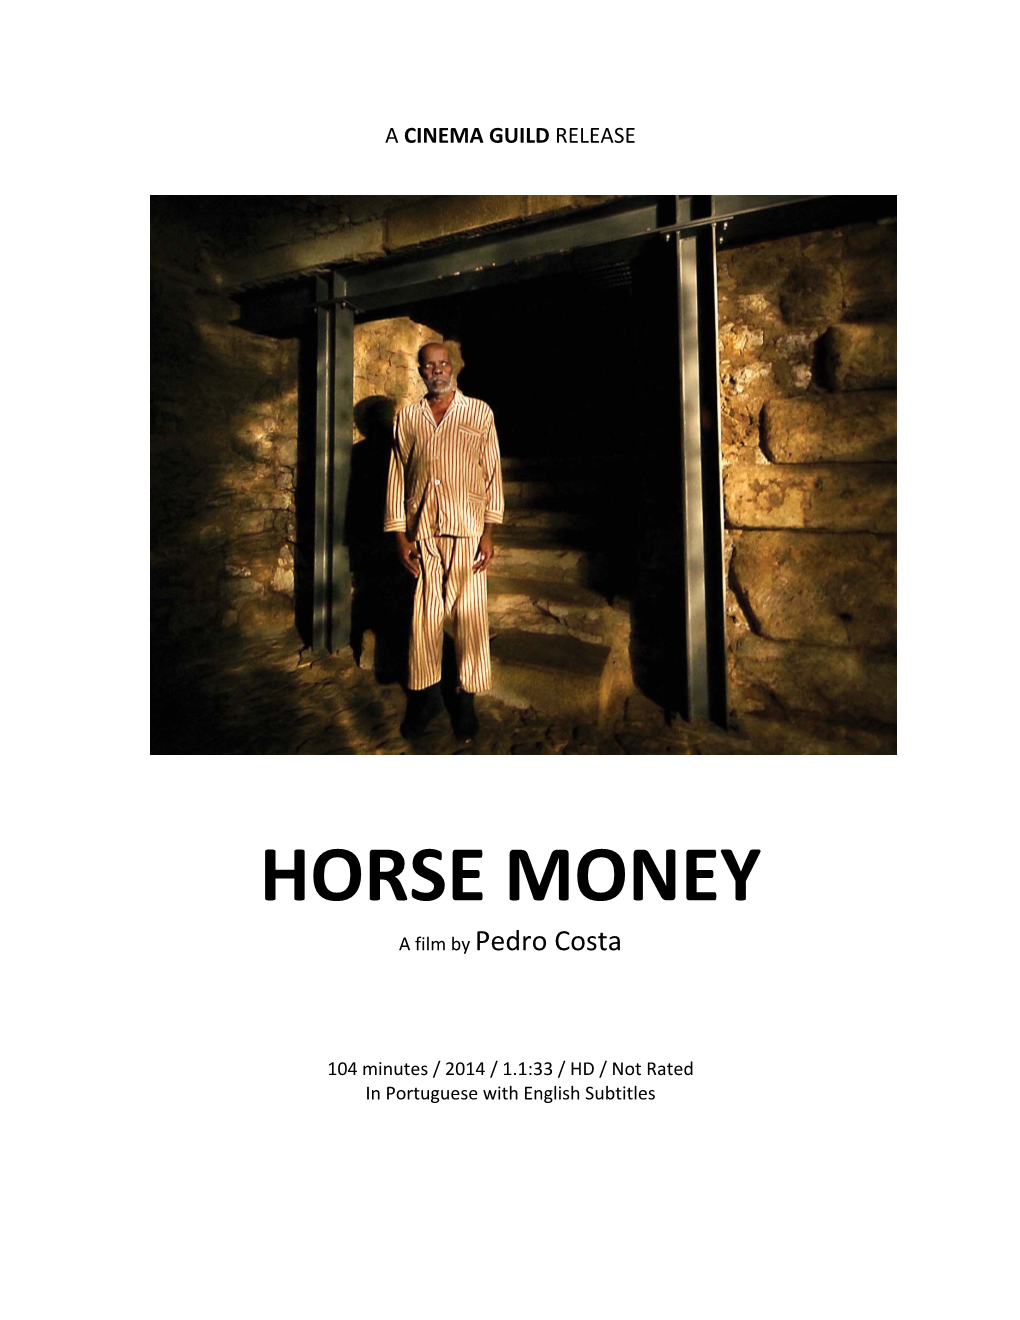 HORSE MONEY a Film by Pedro Costa